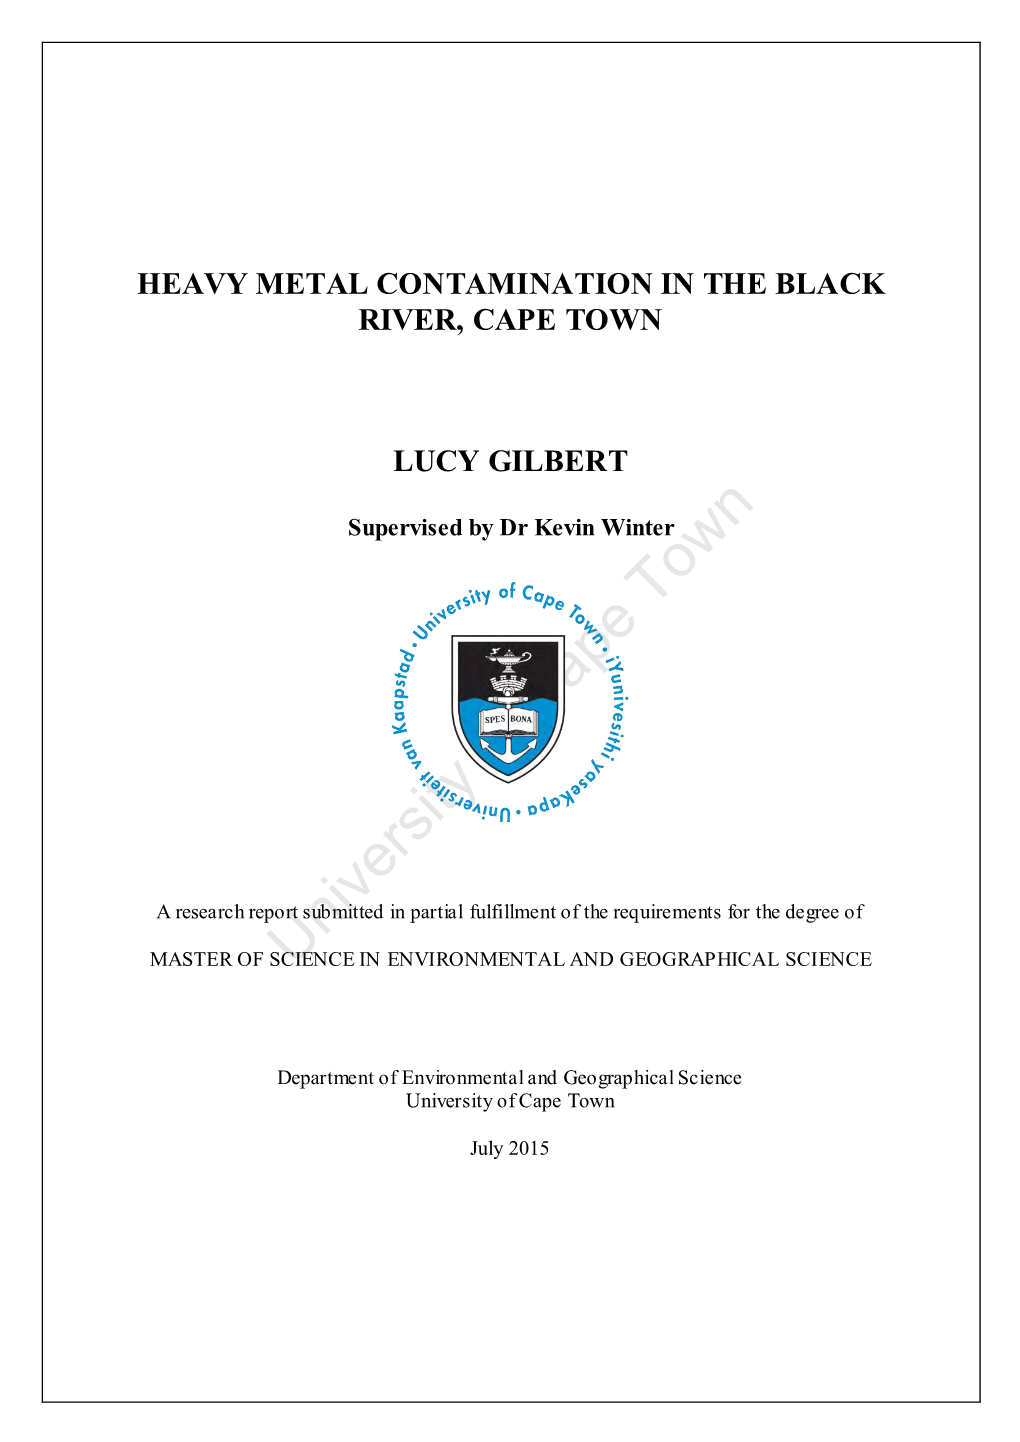 Heavy Metal Contamination in the Black River, Cape Town